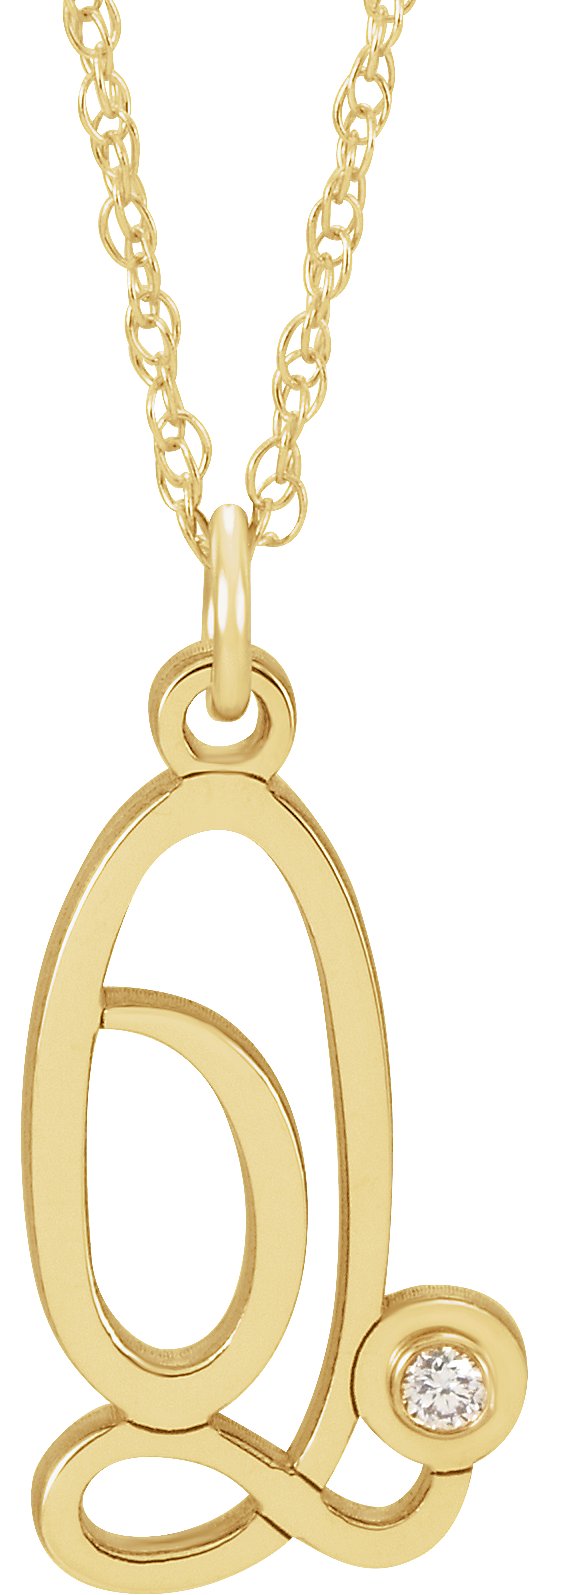 14K Yellow Gold-Plated .02 CT Diamond Script Initial Q 16-18" Necklace